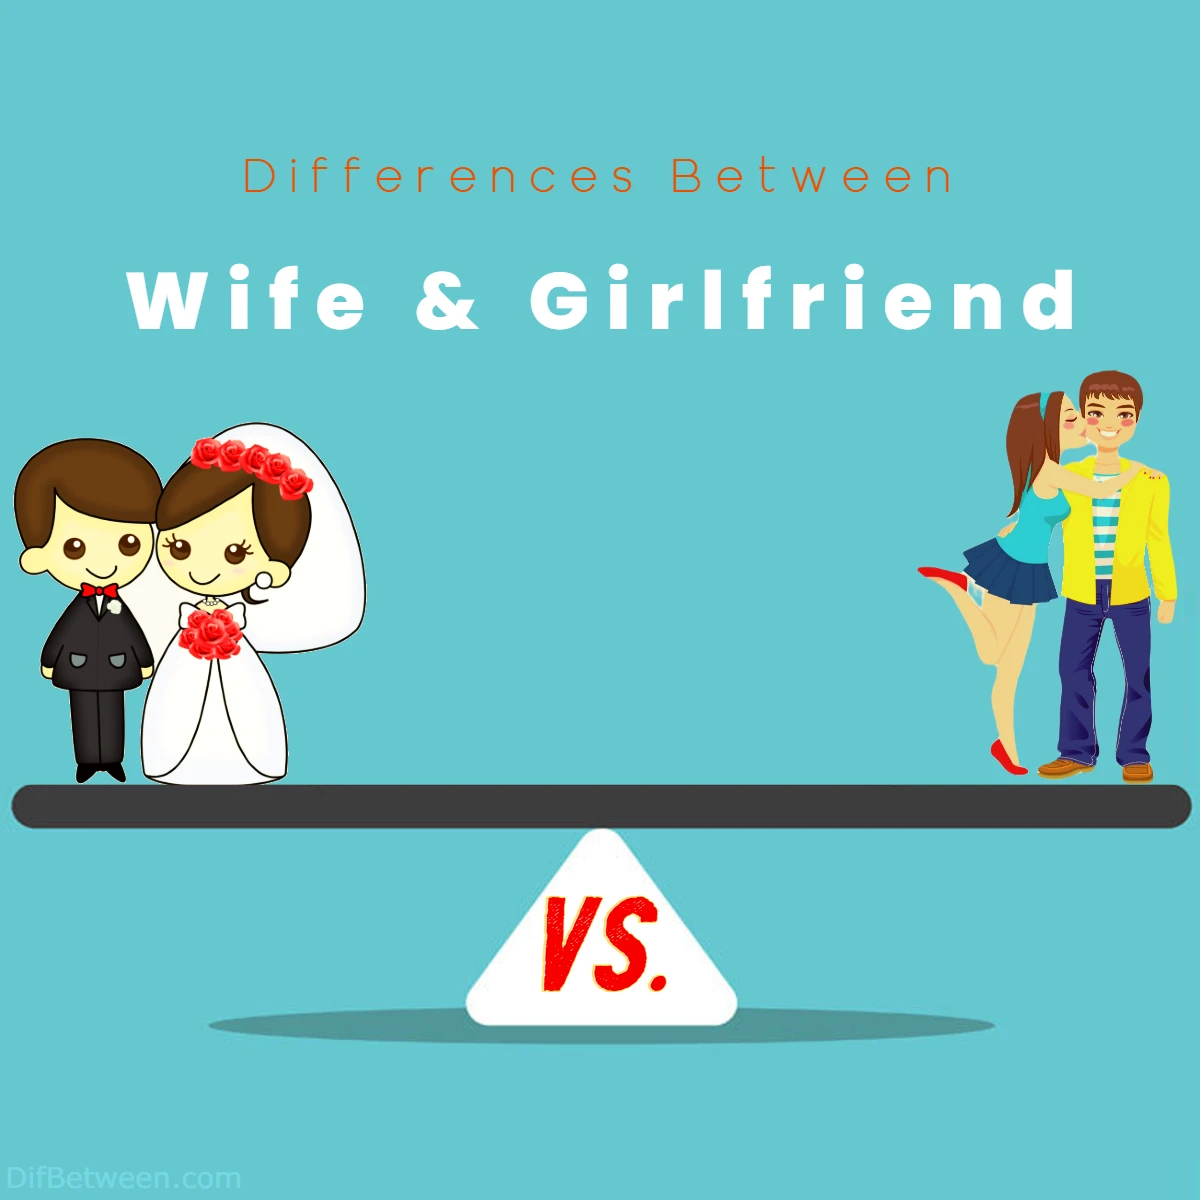 Differences Between Wife and Girlfriend